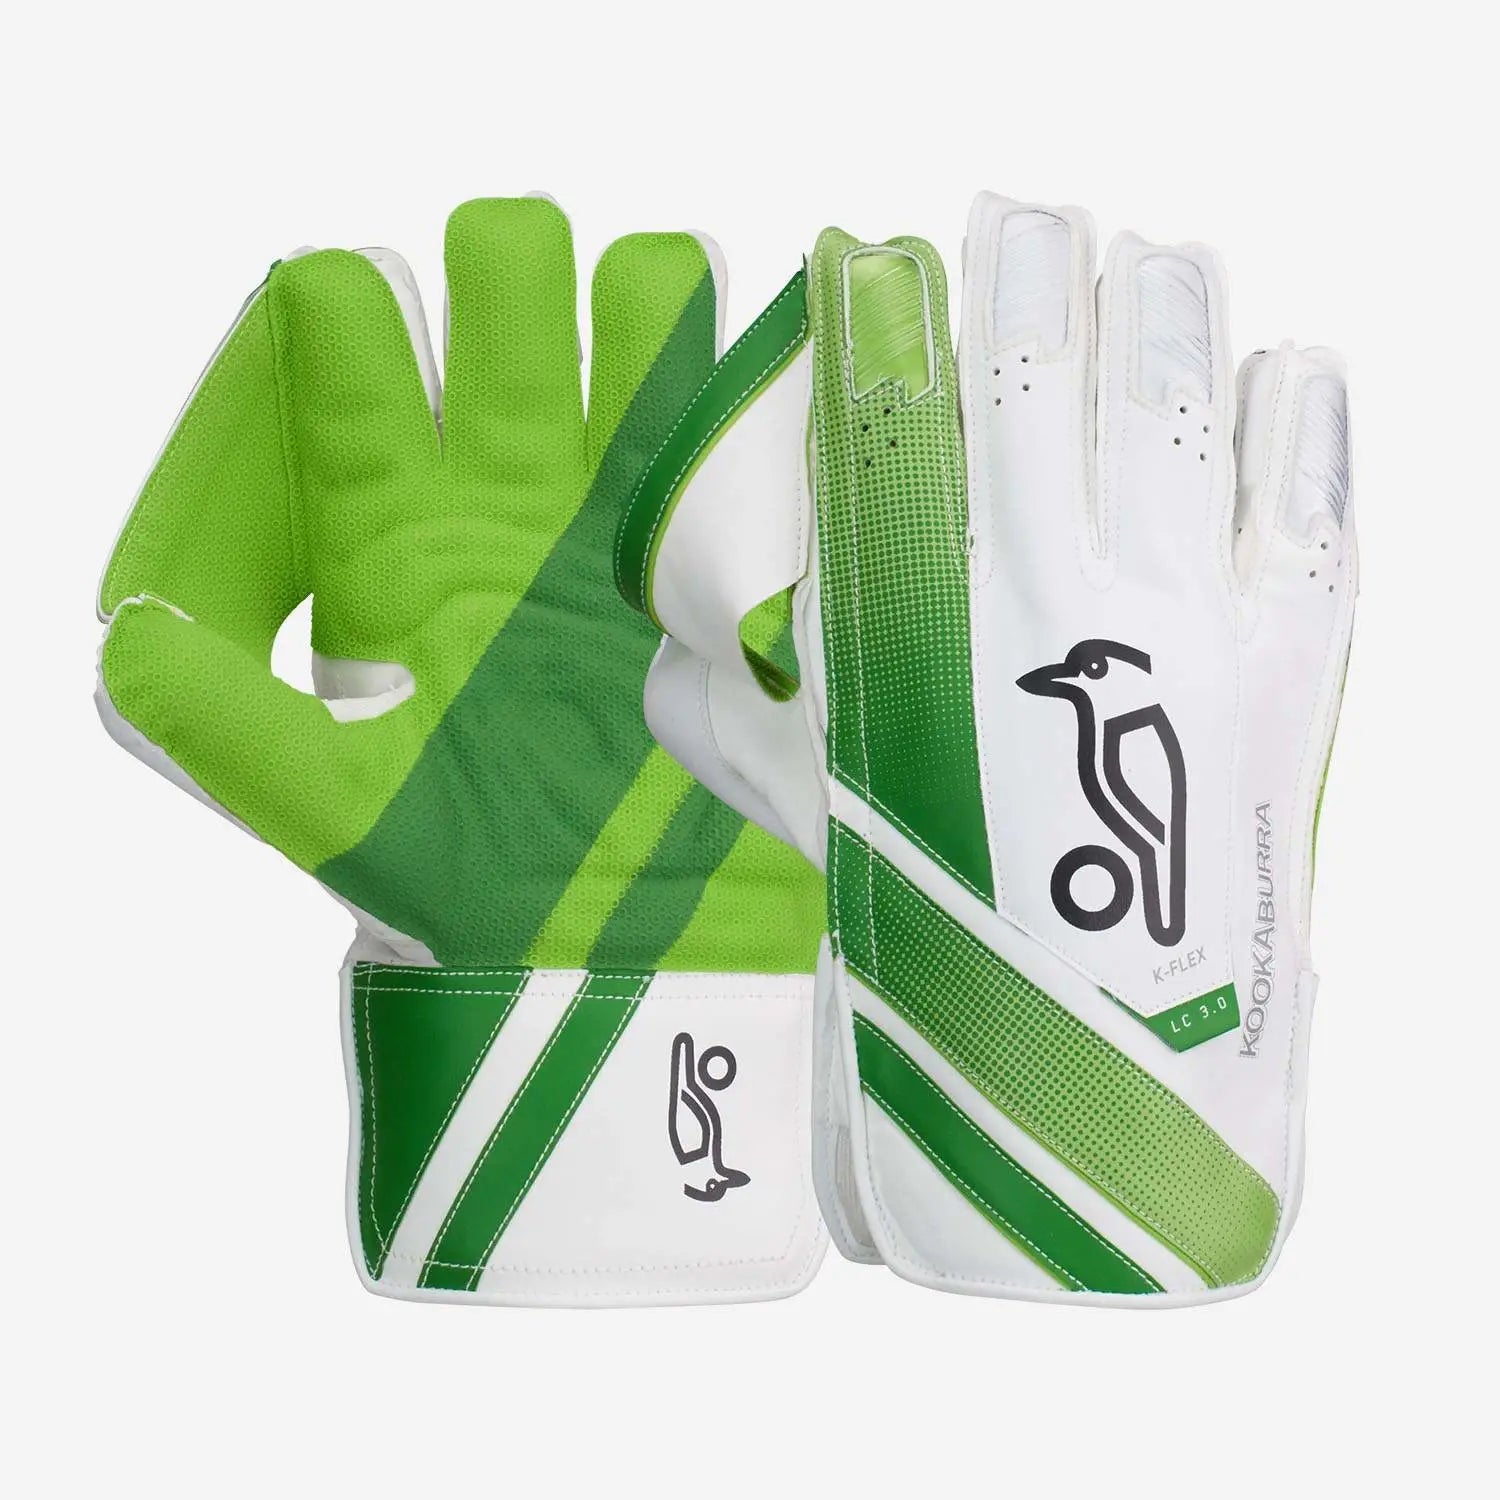 Kookaburra LC 3.0 Wicket Keeping Glove Enhanced ‘Catching Cup’ - Over-Sized Adult - GLOVE - WICKET KEEPING